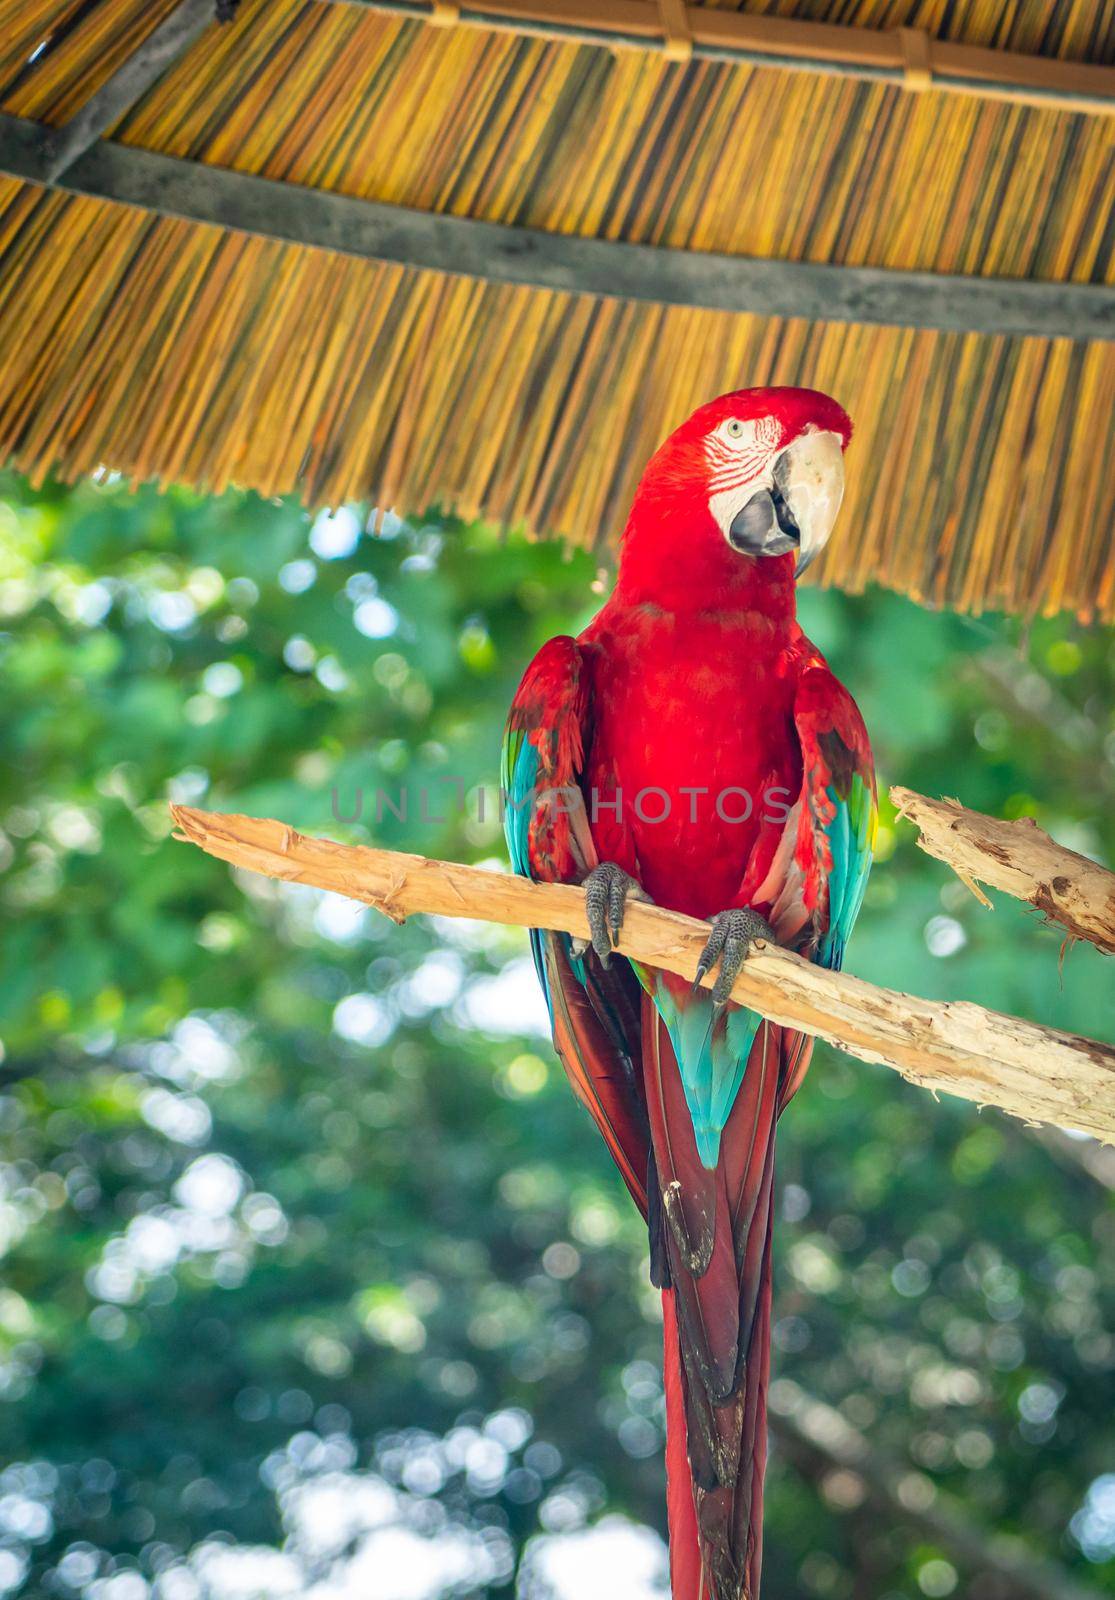 Portrait of colorful Scarlet Macaw parrot against jungle background